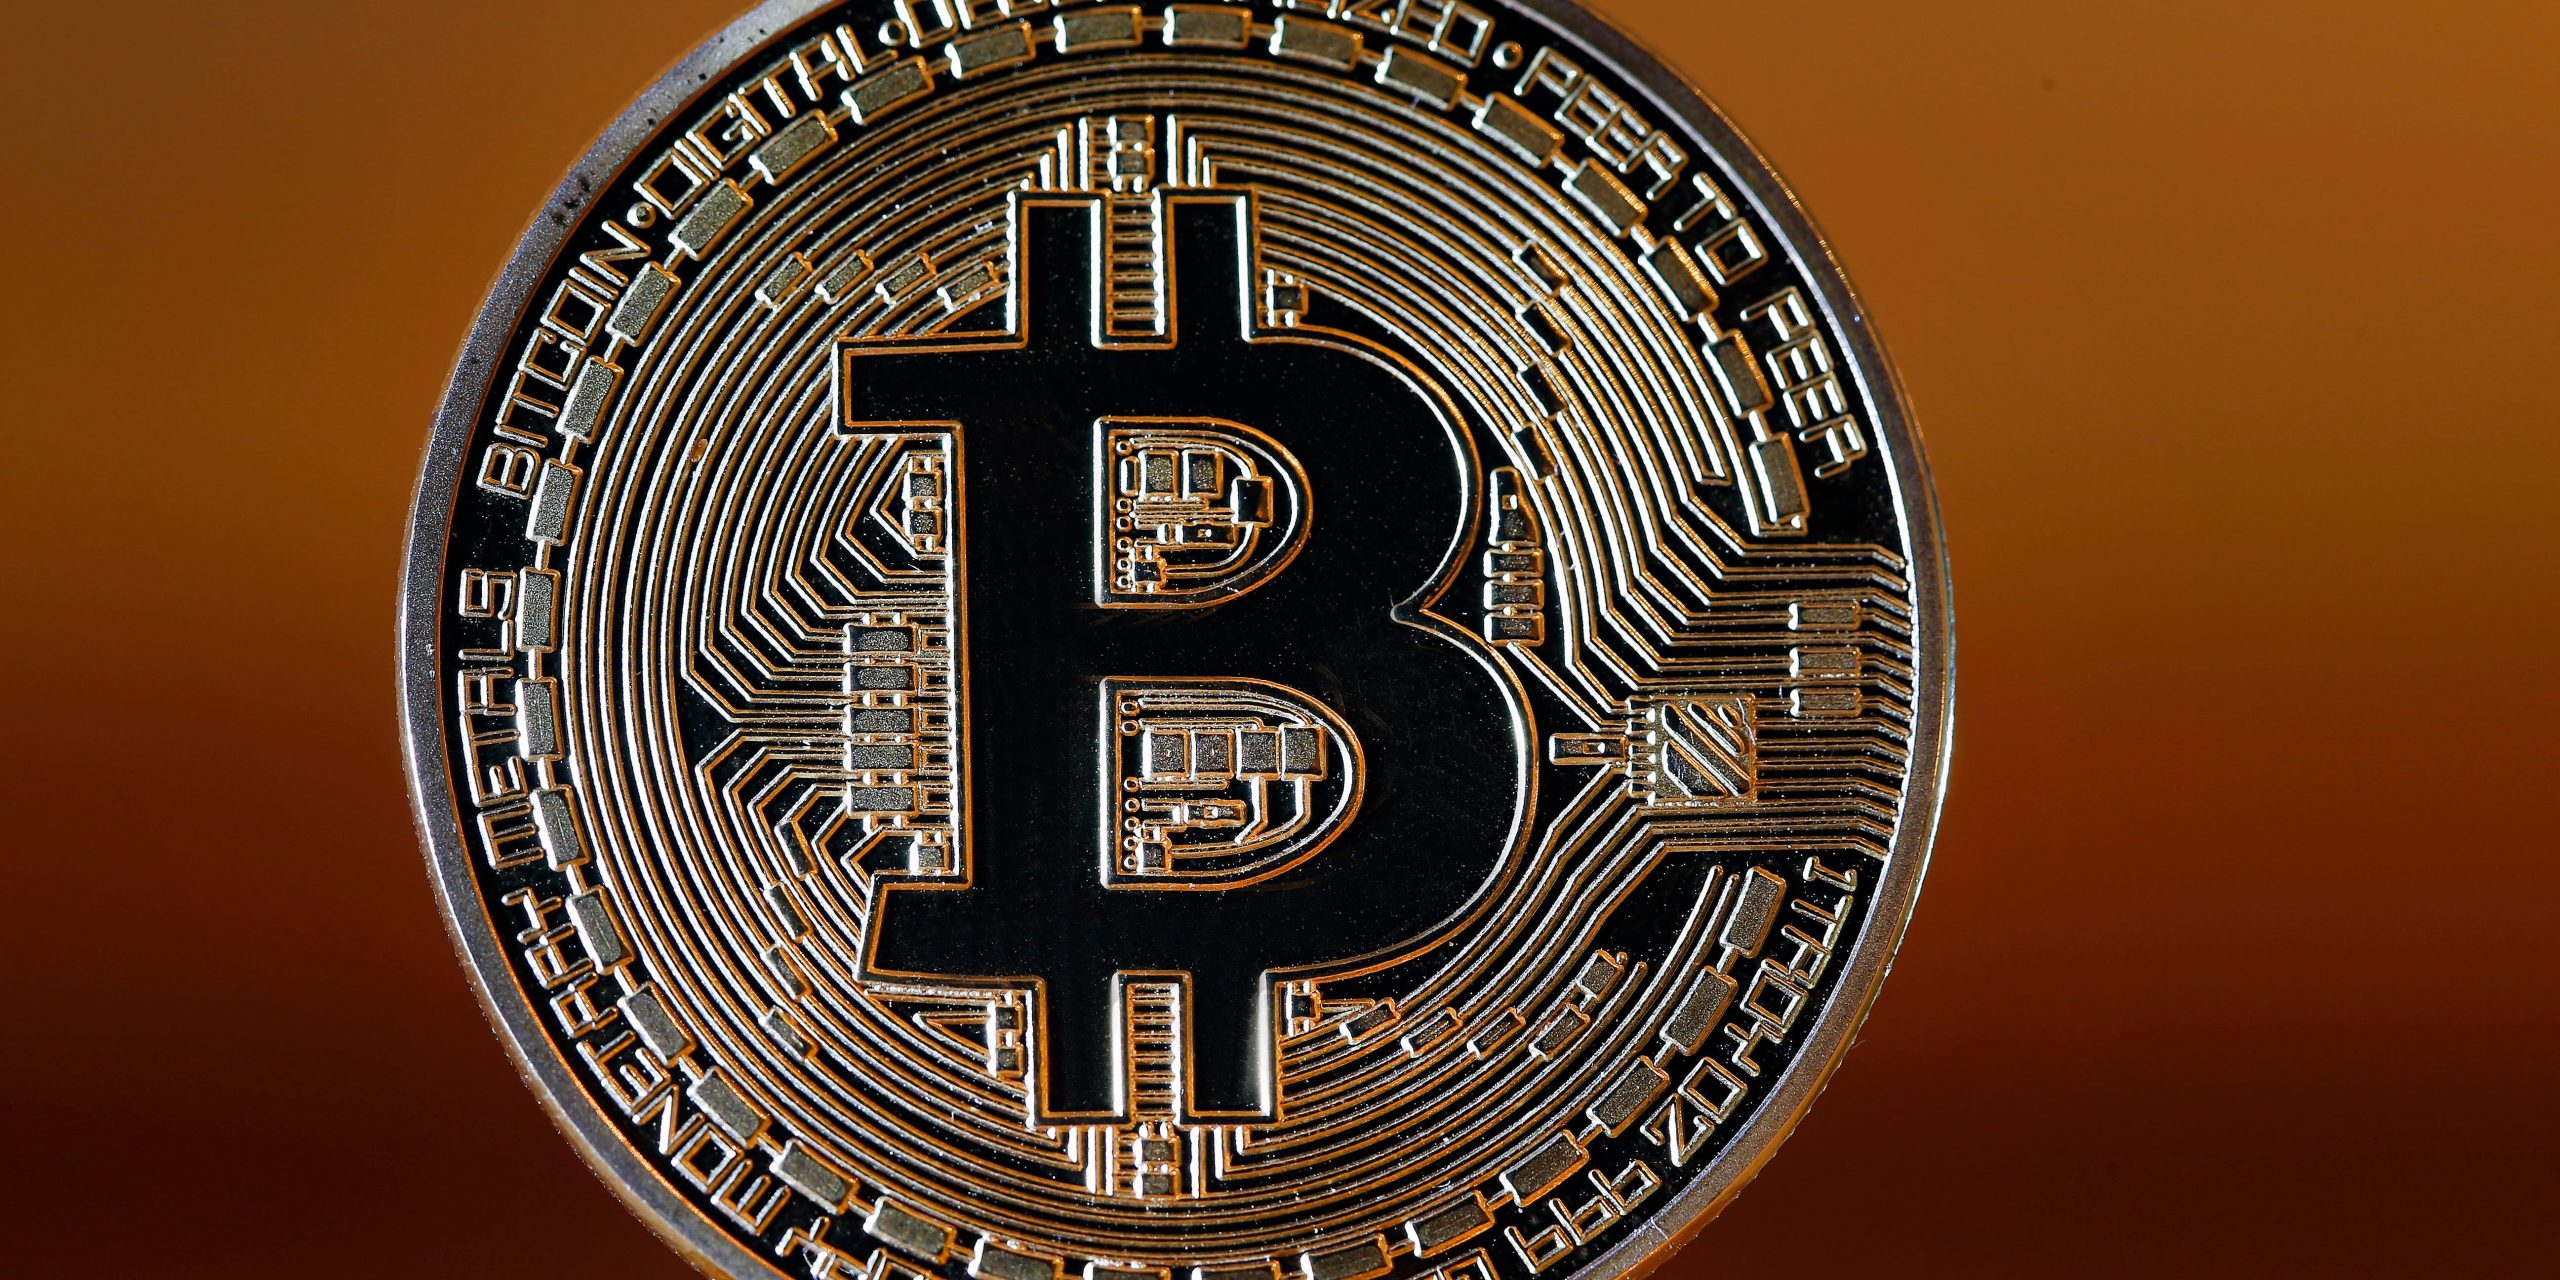 Bitcoin could surge to $14,000 as short-term momentum improves, technical strategist Katie Stockton says | Currency News | Financial and Business News | Markets Insider – Business Insider